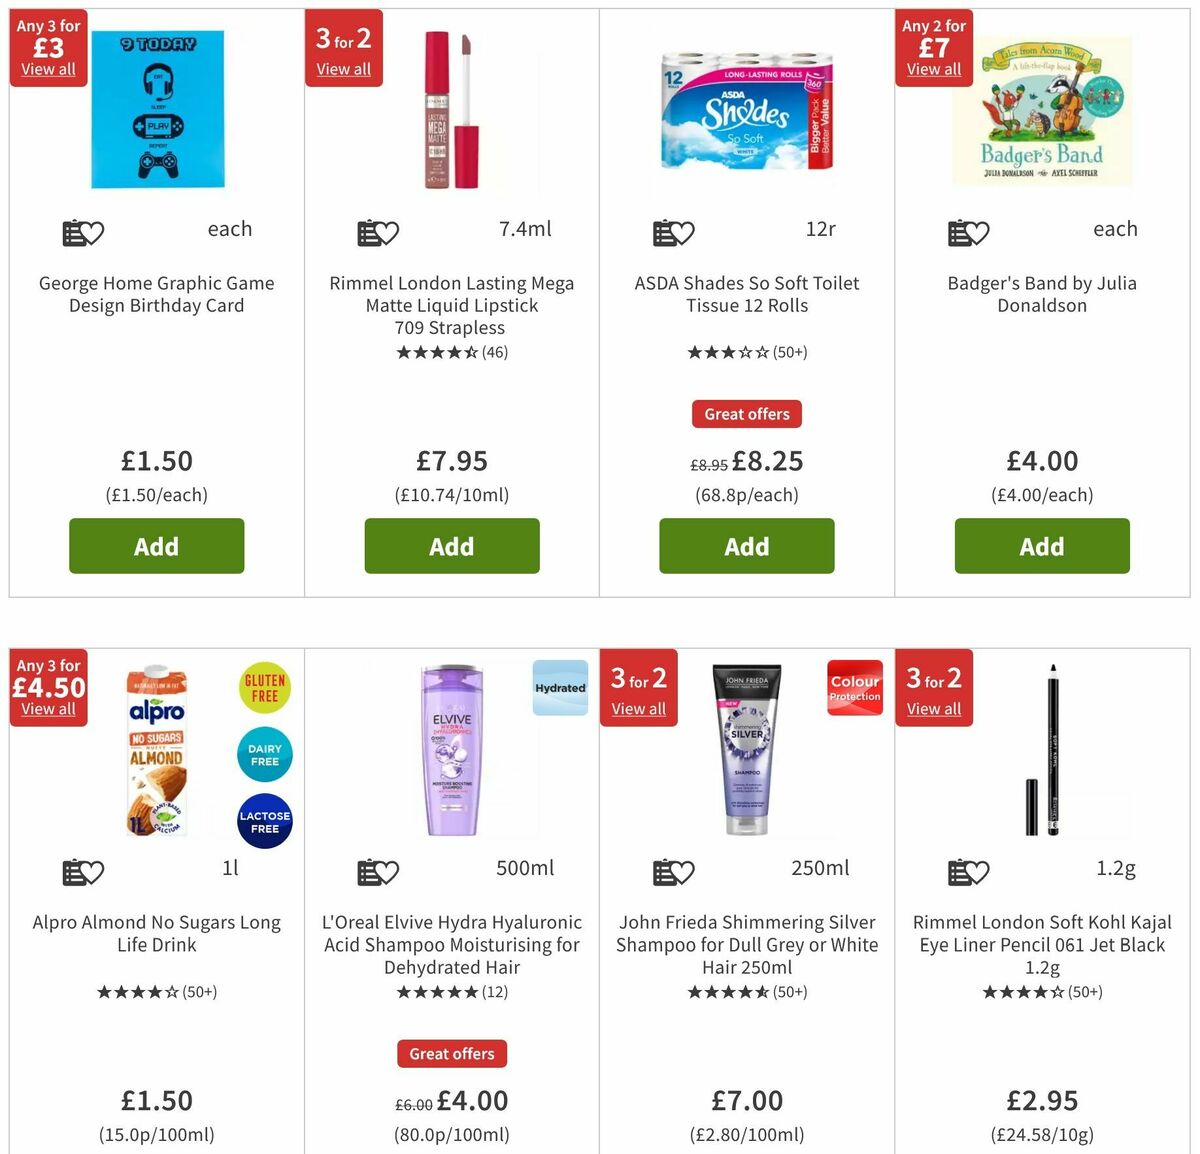 ASDA Offers from 28 June